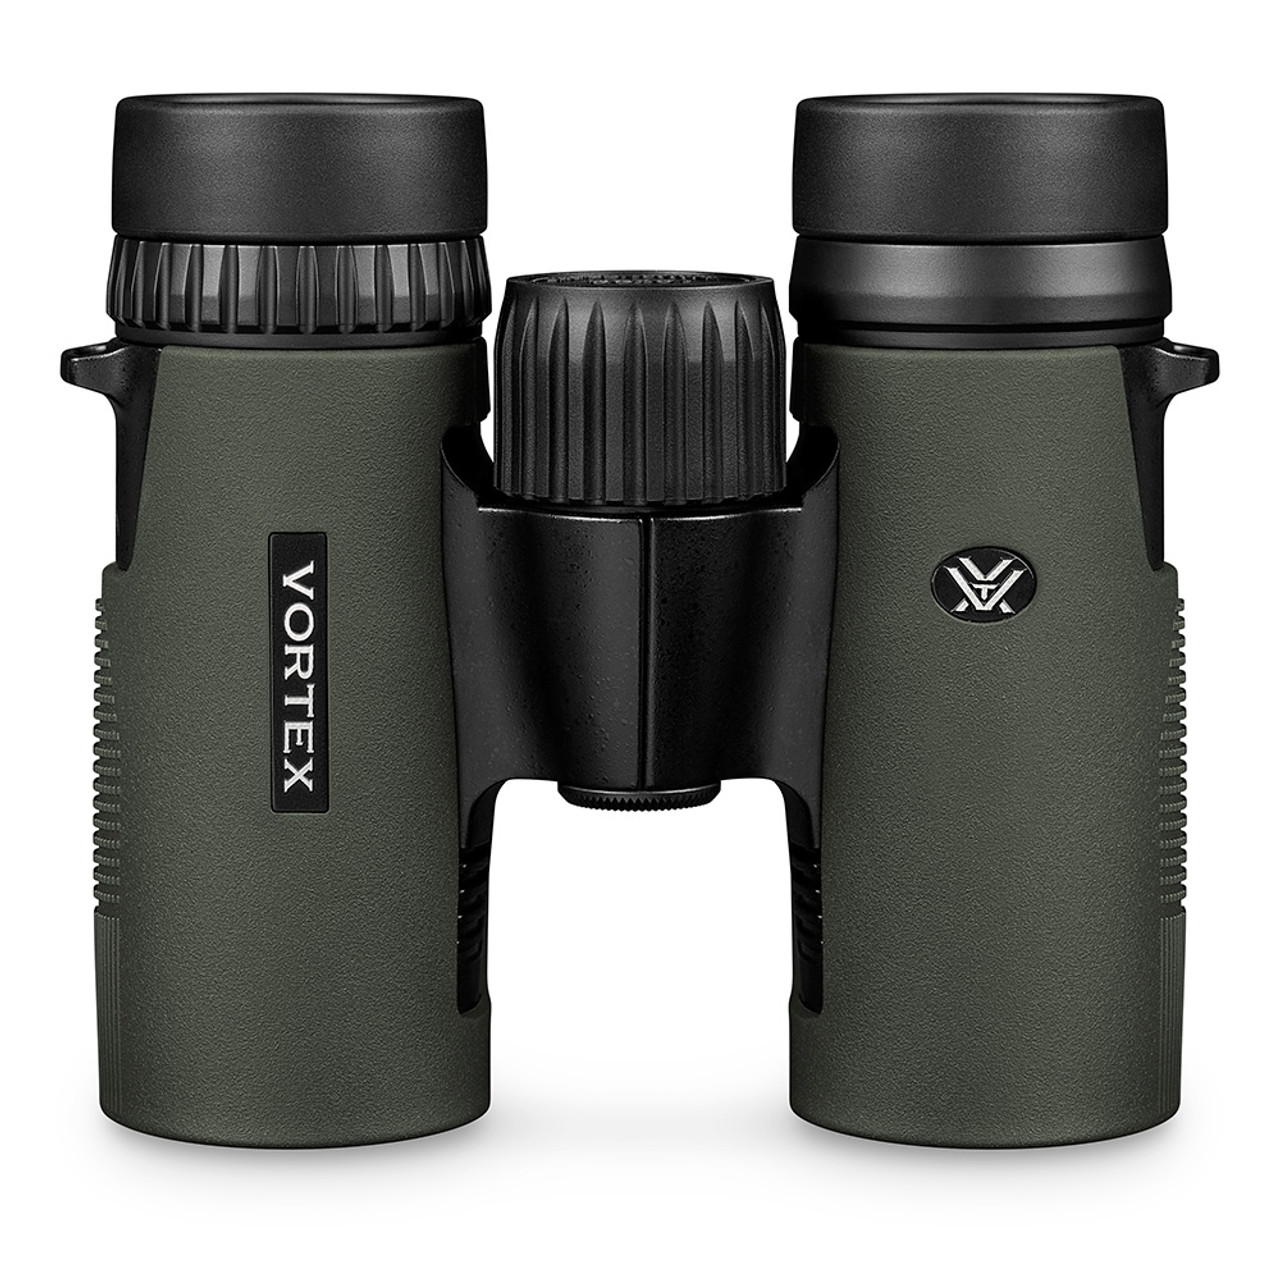 The Diamondback HD is a great example of Vortex’s commitment to pushing the price vs. performance envelope, delivering a rock-solid binocular that optically punches far beyond its class.  

 

 
SKU	VT-DB-213
Magnification	10 x
Objective Lens Diameter	32 mm
Eye Relief	14 mm
Exit Pupil	 3.2 mm
Linear Field of View	340 feet/1000 yards
Angular Field of View	6.5 degrees
Close Focus	6.0 feet
Interpupillary Distance	57 – 73 mm
Height	4.4 inches
Width	5.0 inches
Weight	16.0 ounces
Product Manual (.pdf)	Download PDF
Included in the Box
Deluxe carry case
Deluxe carry case strap
Comfort neck strap
Tethered objective lens covers
Rainguard eyepiece cover
Lens Cloth

 
VIP Unconditional Lifetime Warranty
 